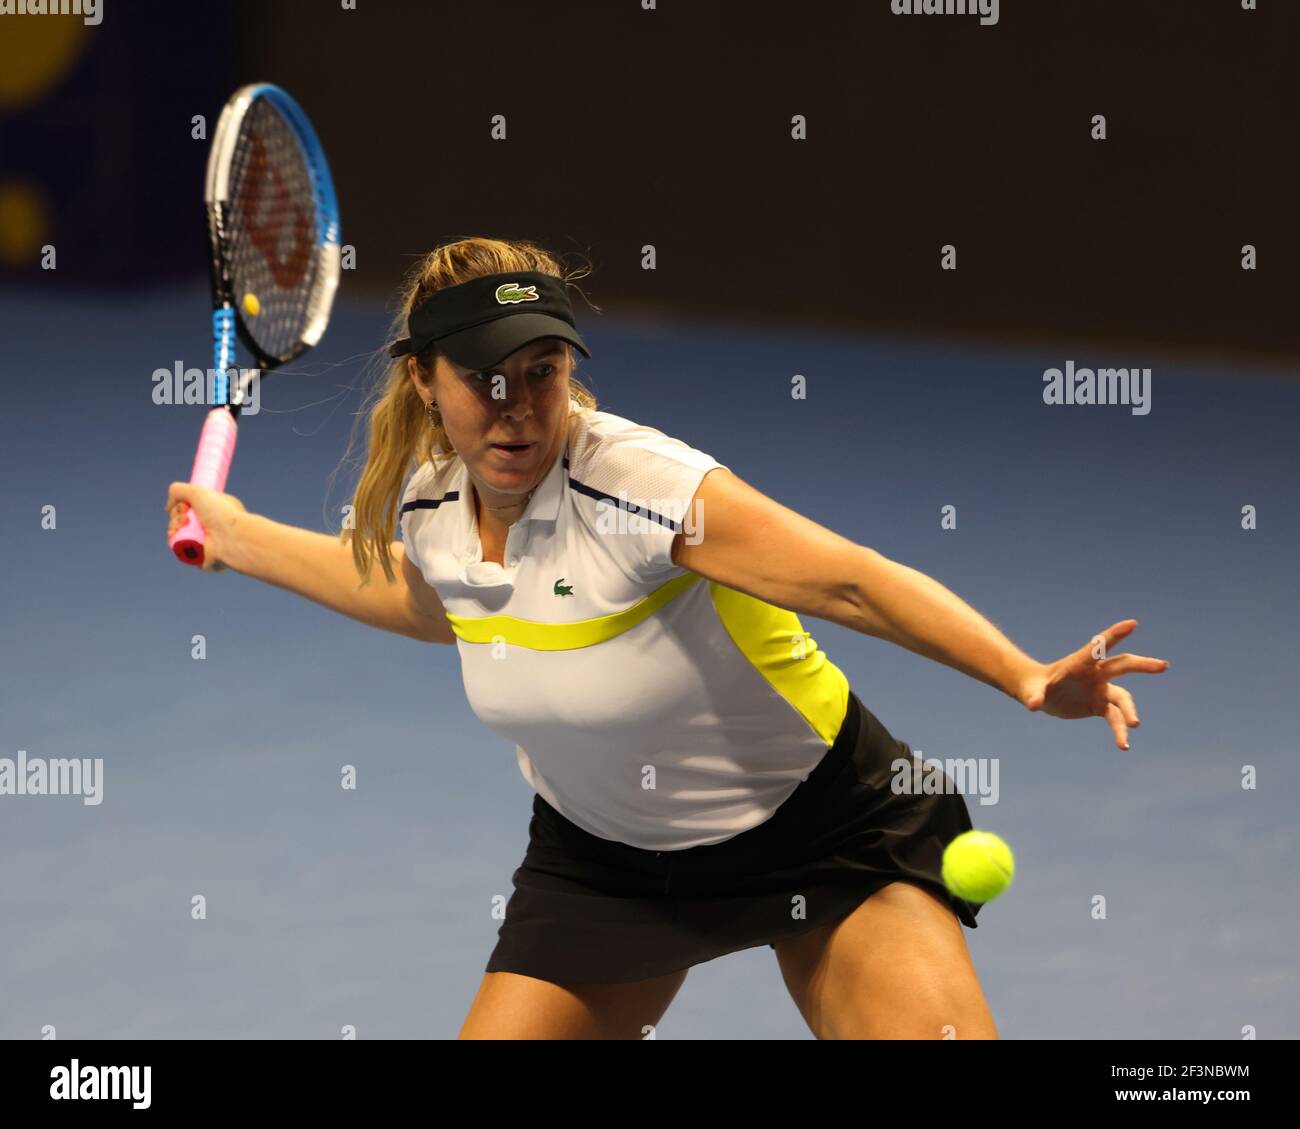 St. Petersburg, Russia. 16th Mar, 2021. Anastasia Pavlyuchenkova of Russia playing against Cagla Buyukakcay of Turkey during the St.Petersburg Ladies Trophy 2021 tennis tournament at Sibur Arena.Final score: (Anastasia Pavlyuchenkova 2 - 0 Cagla Buyukakcay) Credit: SOPA Images Limited/Alamy Live News Stock Photo